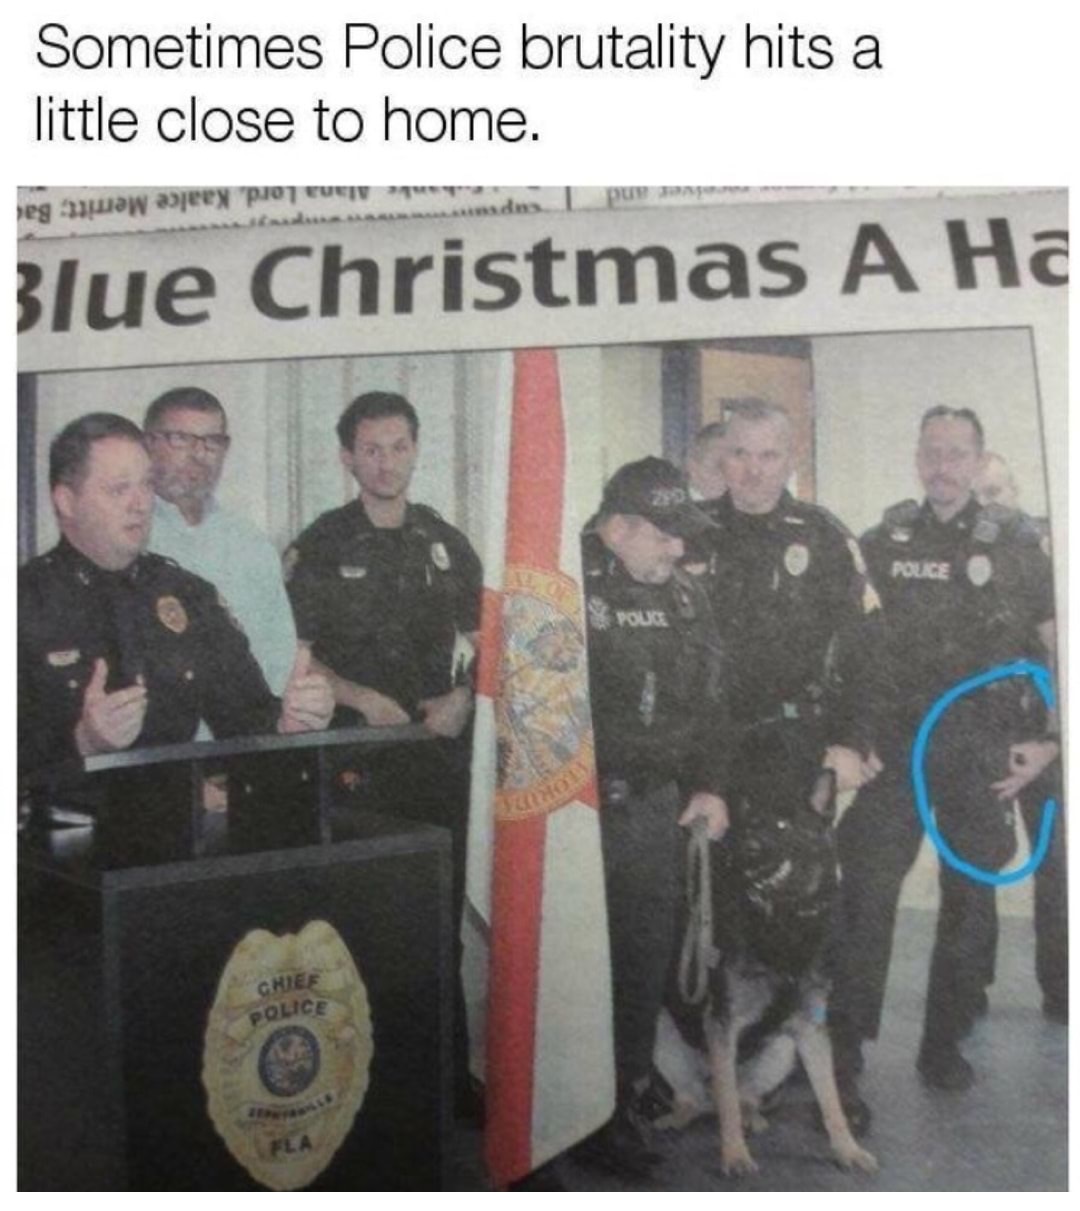 funny meme - police brutality meme - Sometimes Police brutality hits a little close to home. regw ajeex po Blue Christmas A Ha Chief Olice